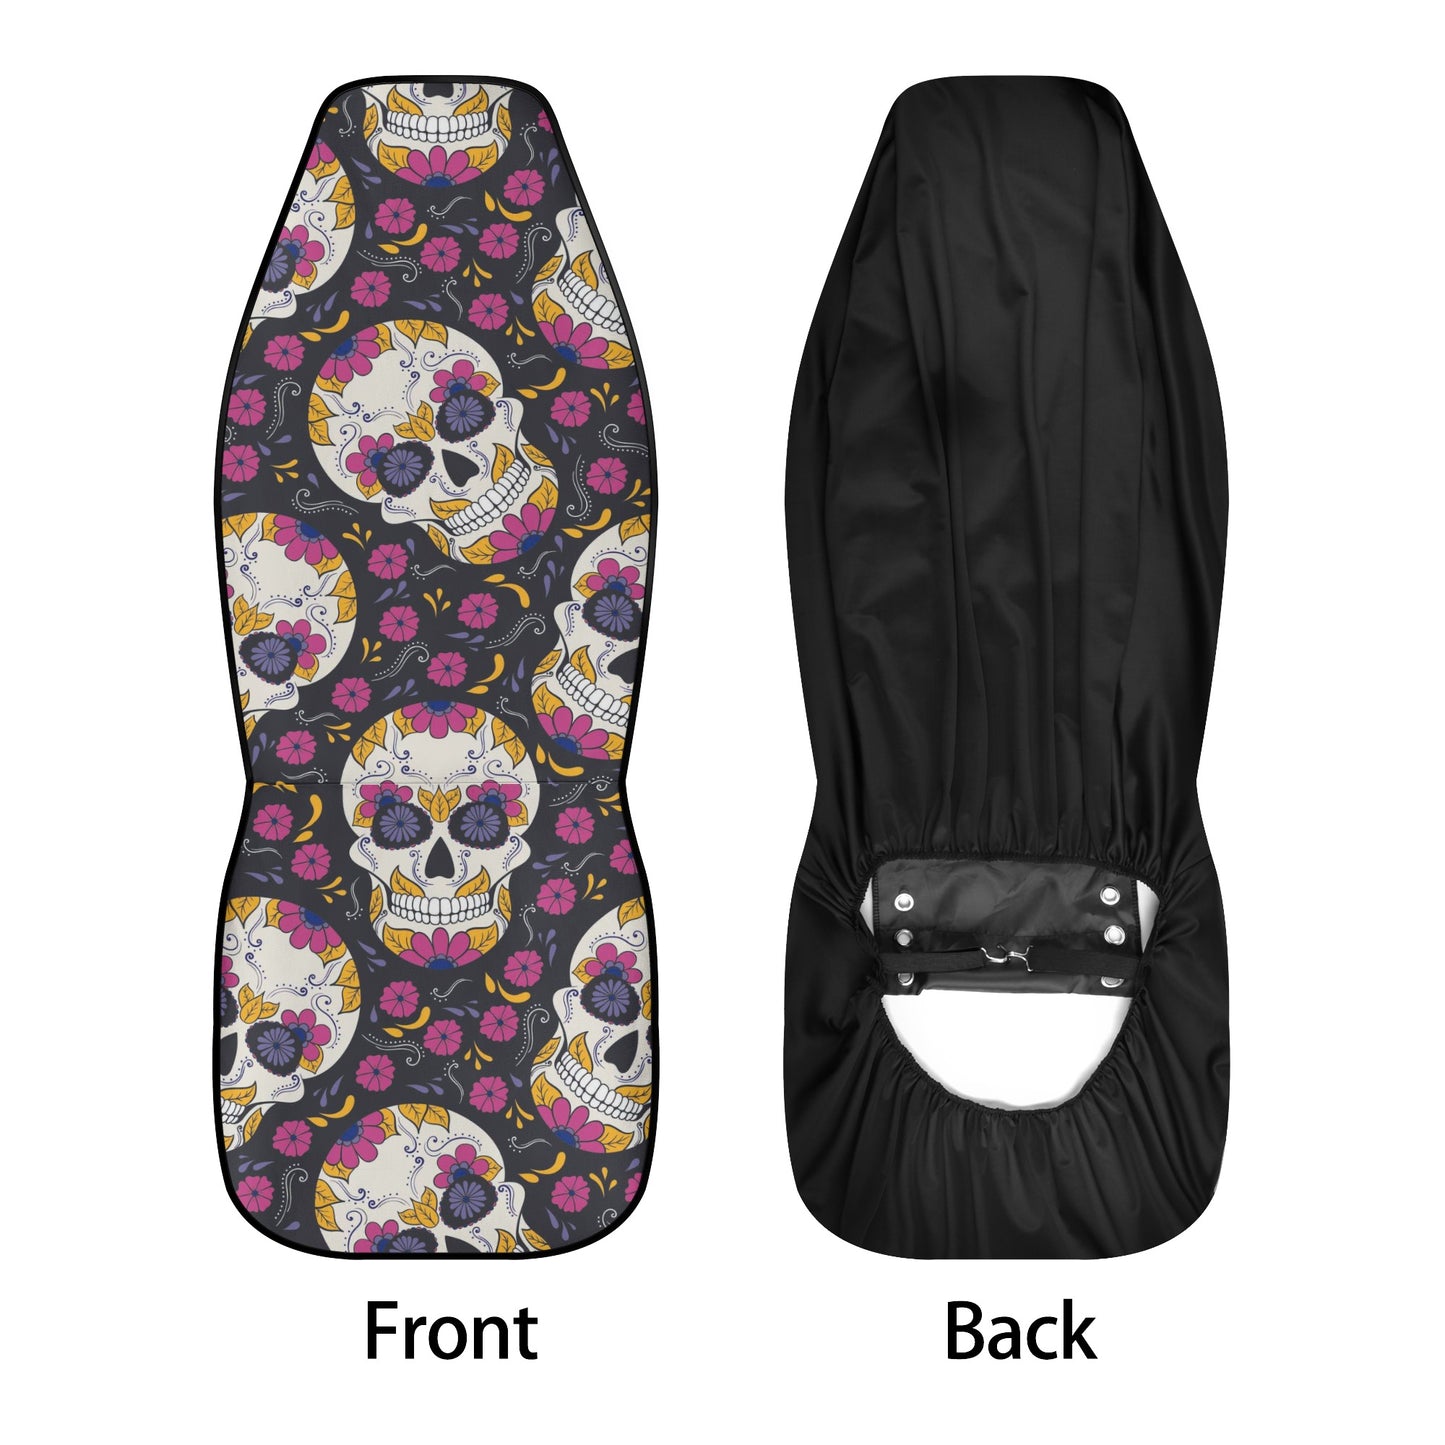 Mexican skull car seat protector cover, mexican skull floor mat for car, mexico car accessories, sugar skull girl truck seat cover, candy sk